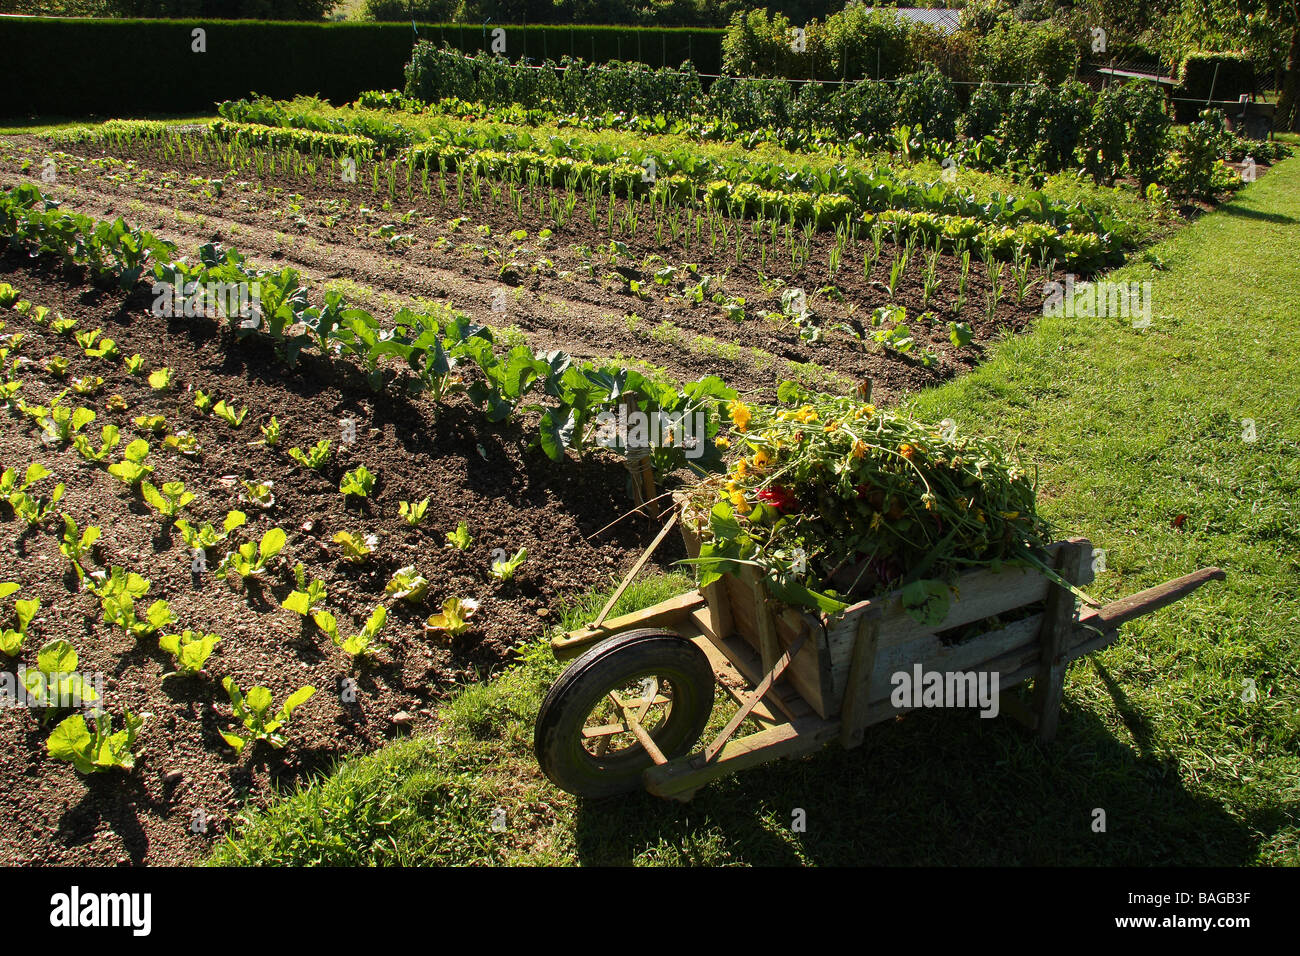 A view over a well tended vegetable garden An old wooden wheelbarrow filled with cuttings in the foreground Stock Photo